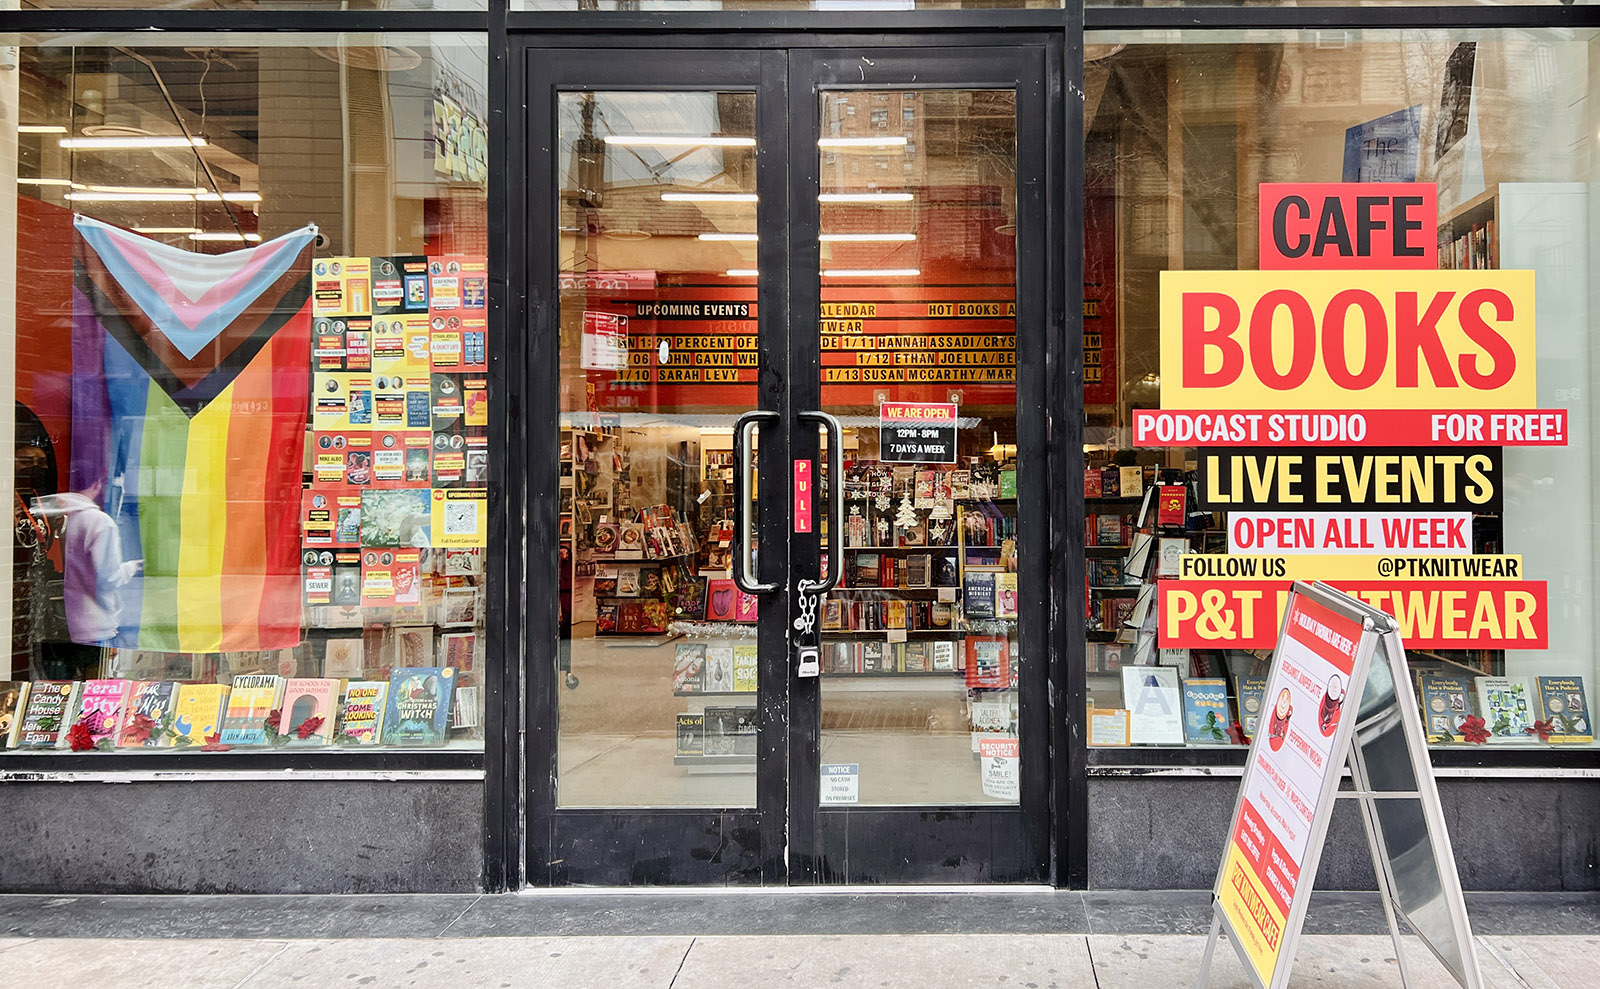 front door of the bookshop with large glass windows where books can be seen on shelves inside